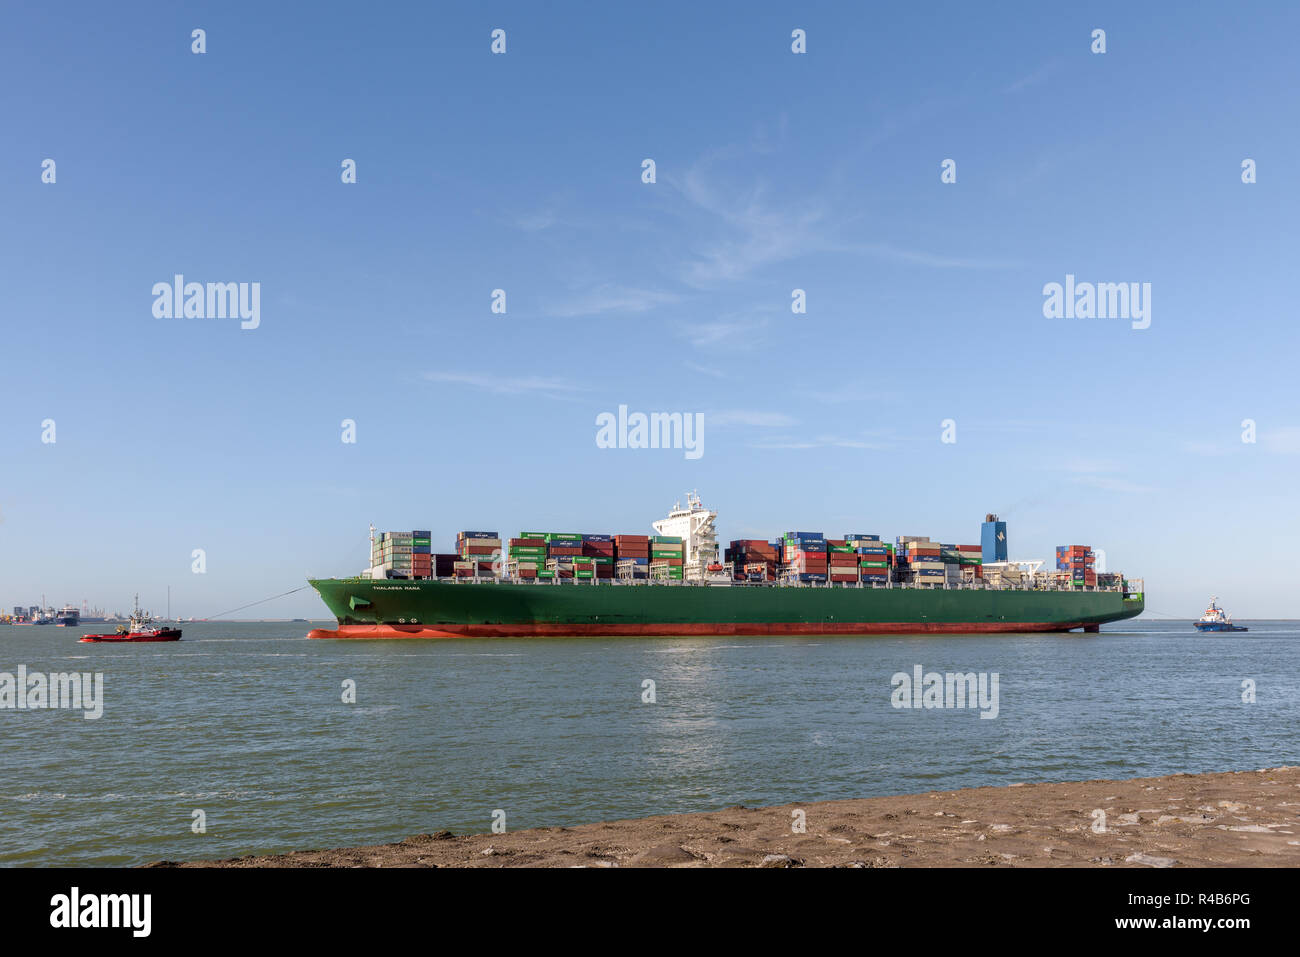 ROTTERDAM, THE NETHERLANDS - FEBRUARY 16, 2018: The large container ship Thalassa Mana is escorted by tugs at its arrival at the Maasvlakte, Port of R Stock Photo